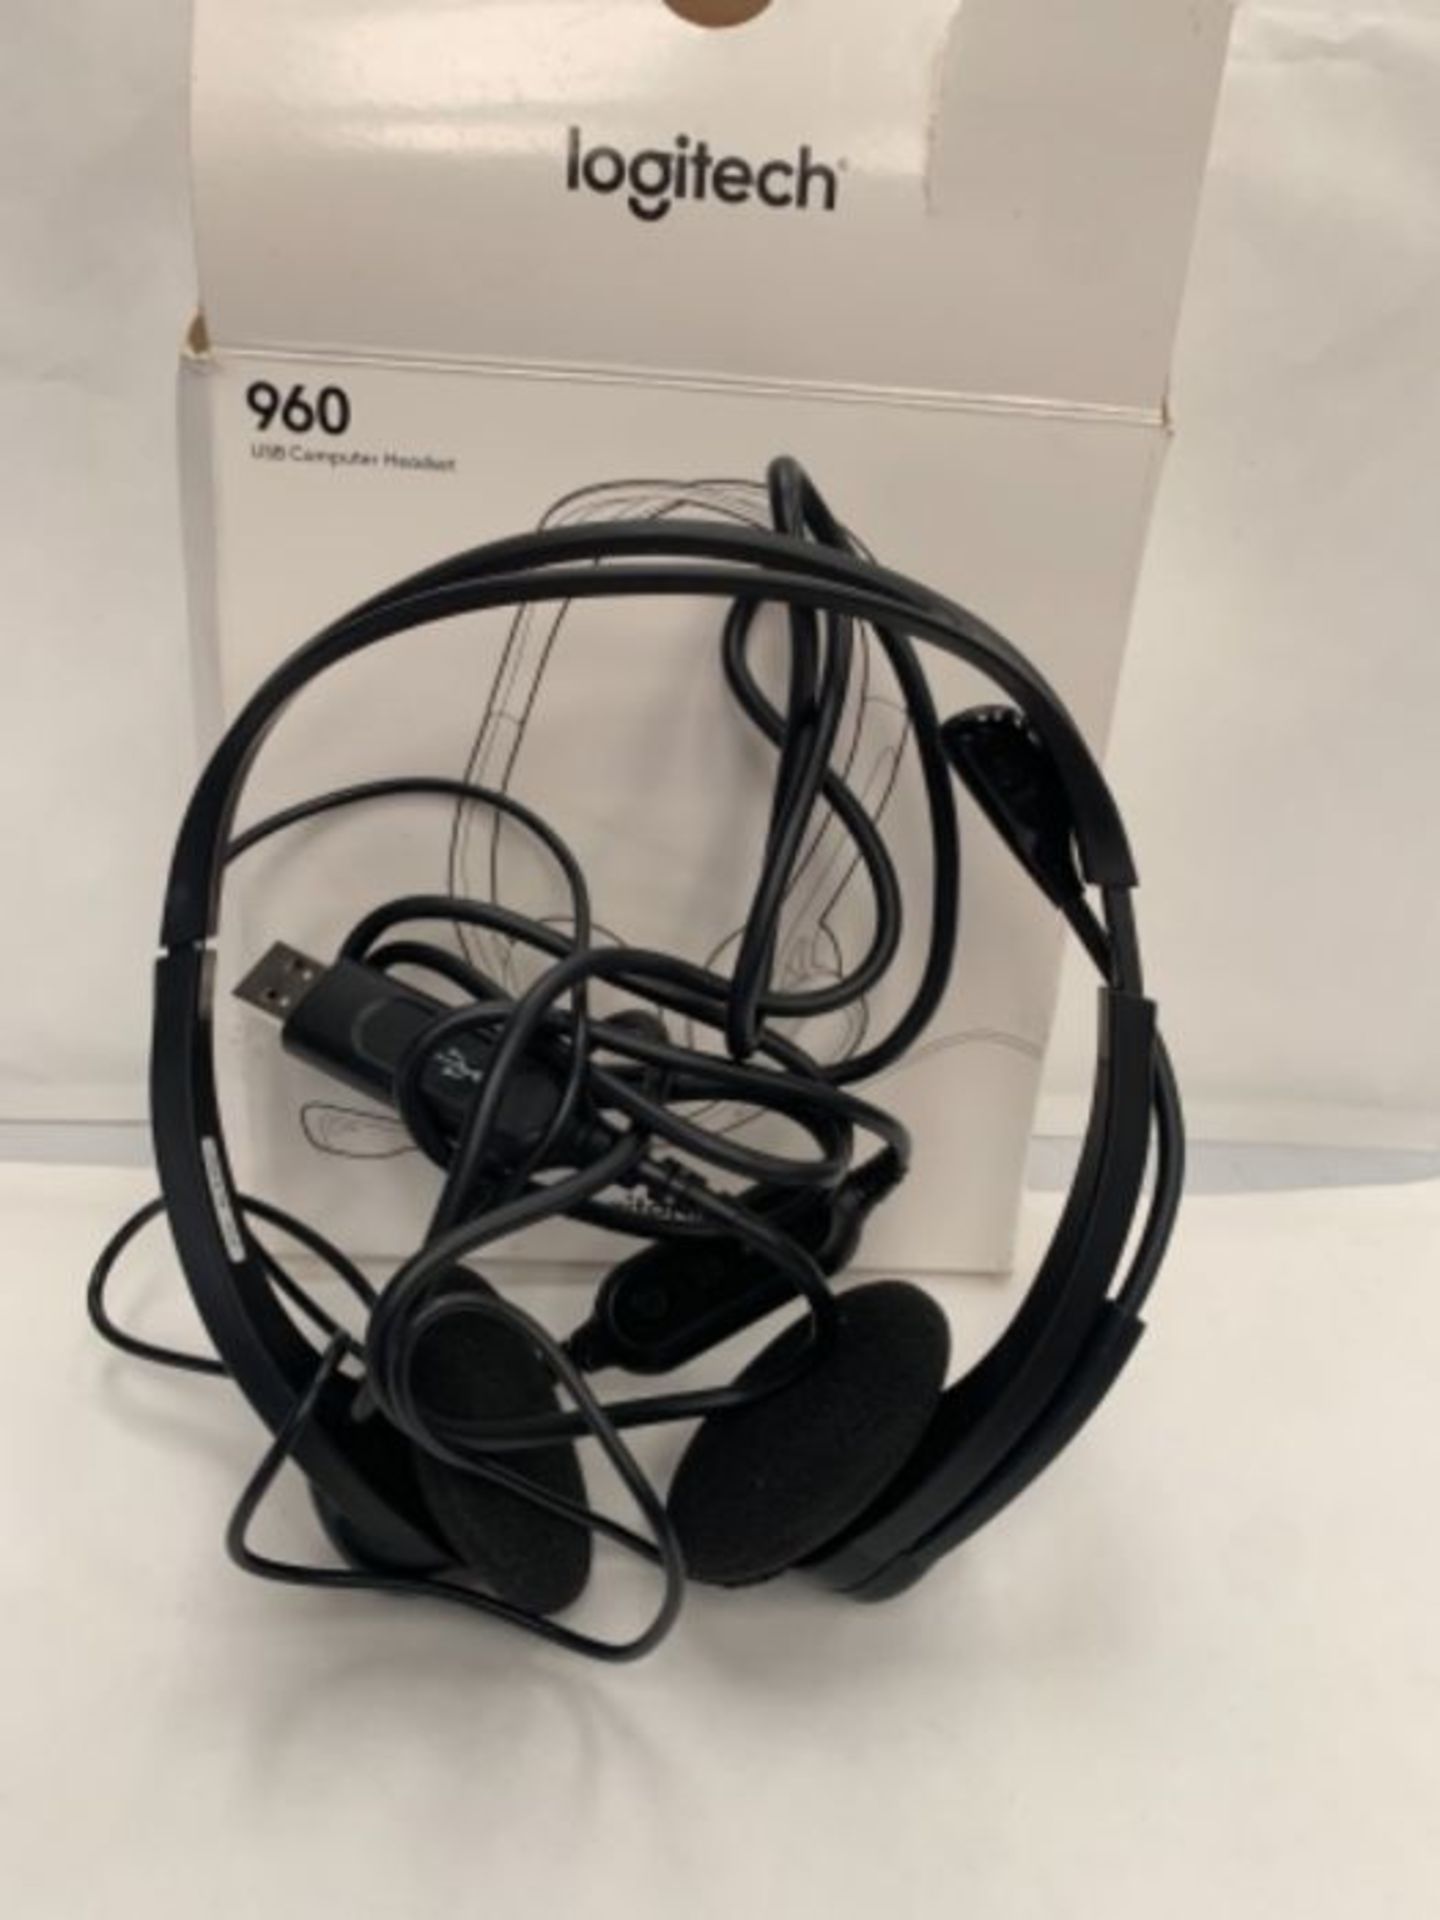 Logitech 960 Wired Headset, Stereo Headphones with Noise-Cancelling Microphone, USB, L - Image 2 of 2